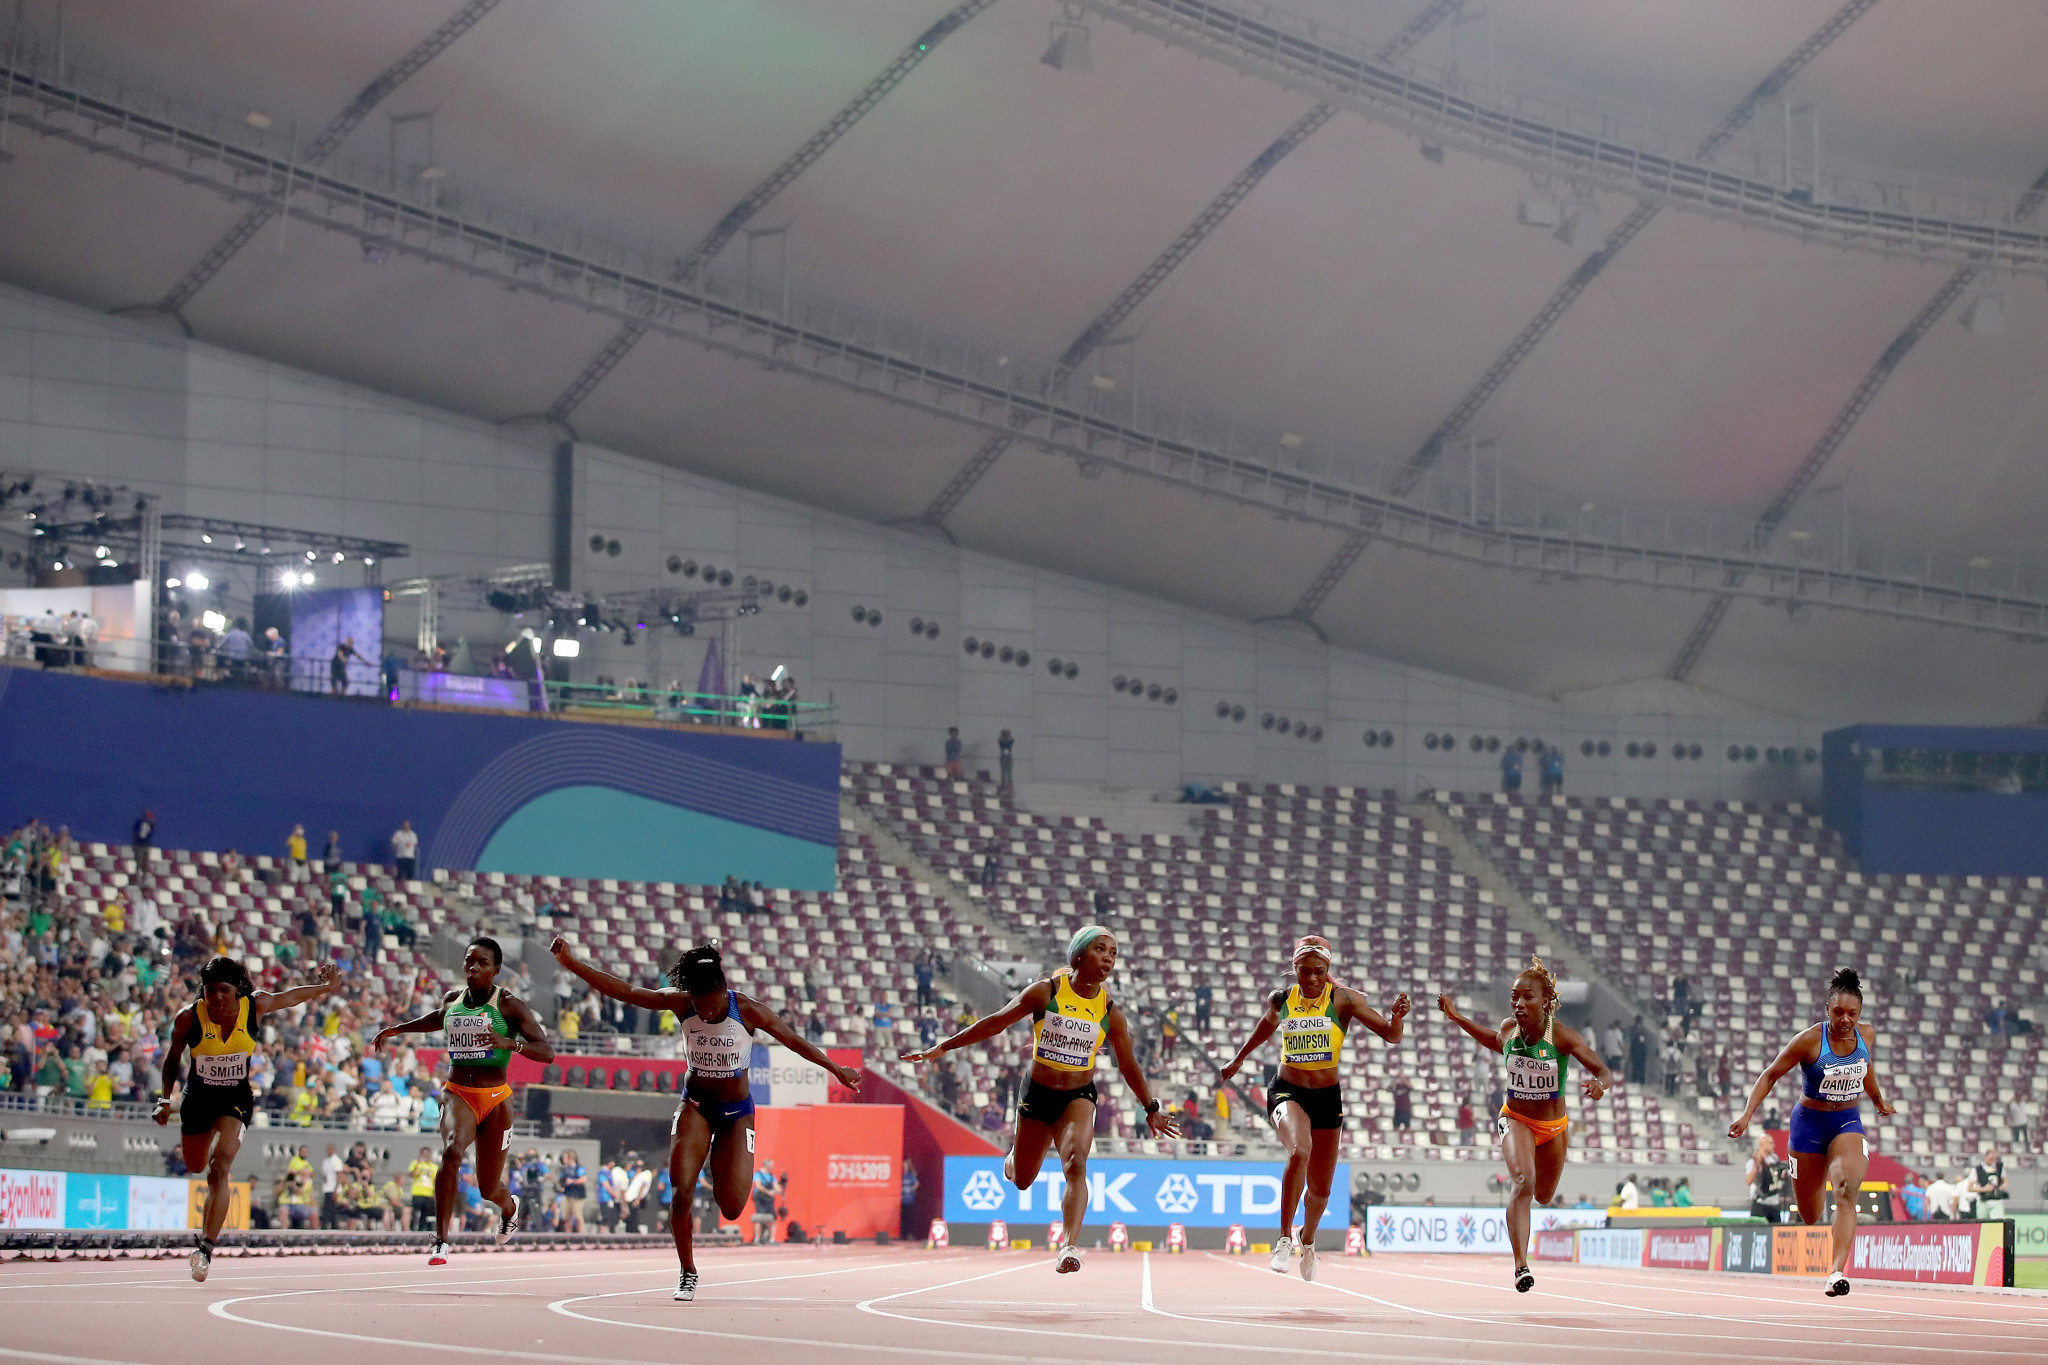 The final of the women's 100m, won by Jamaica's Shelly-Ann Fraser-Pryce, took place in an almost empty Khalifa International Stadium with the majority of the already small crowd have departed a long time before the started ©Getty Images